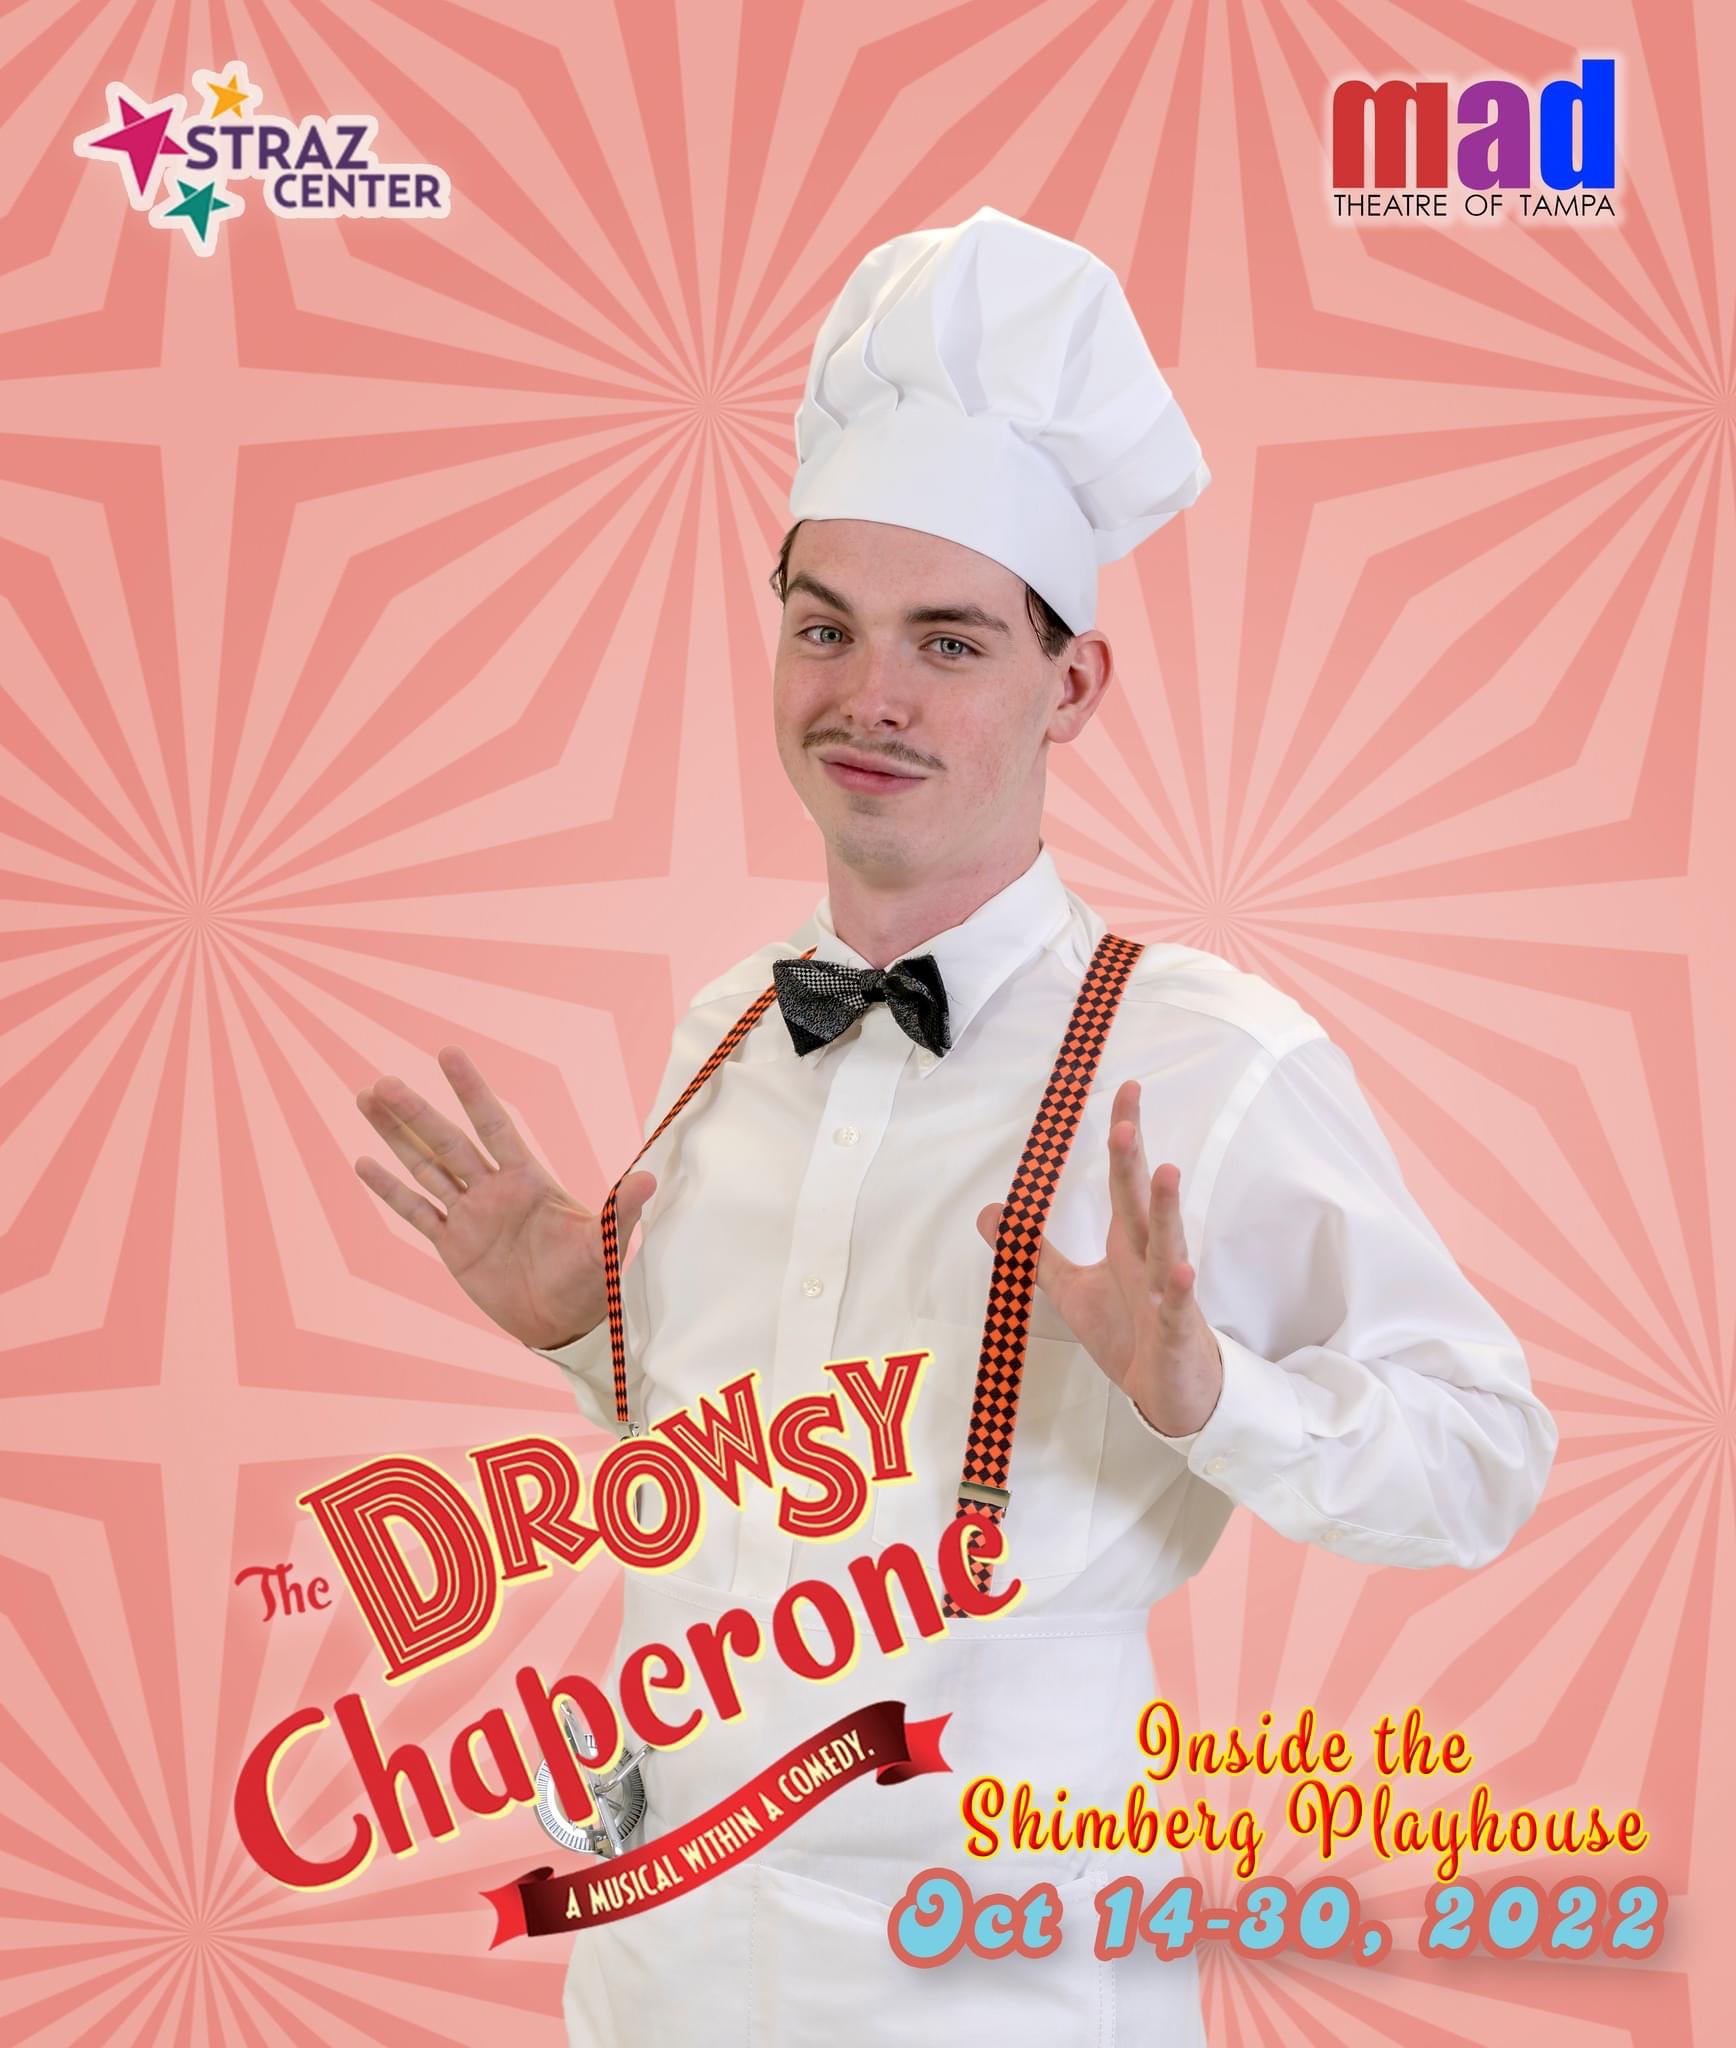 Meet Vincenzo as played by Dylan Fidler in mad Theatre of Tampa’s “The Drowsy Chaperone